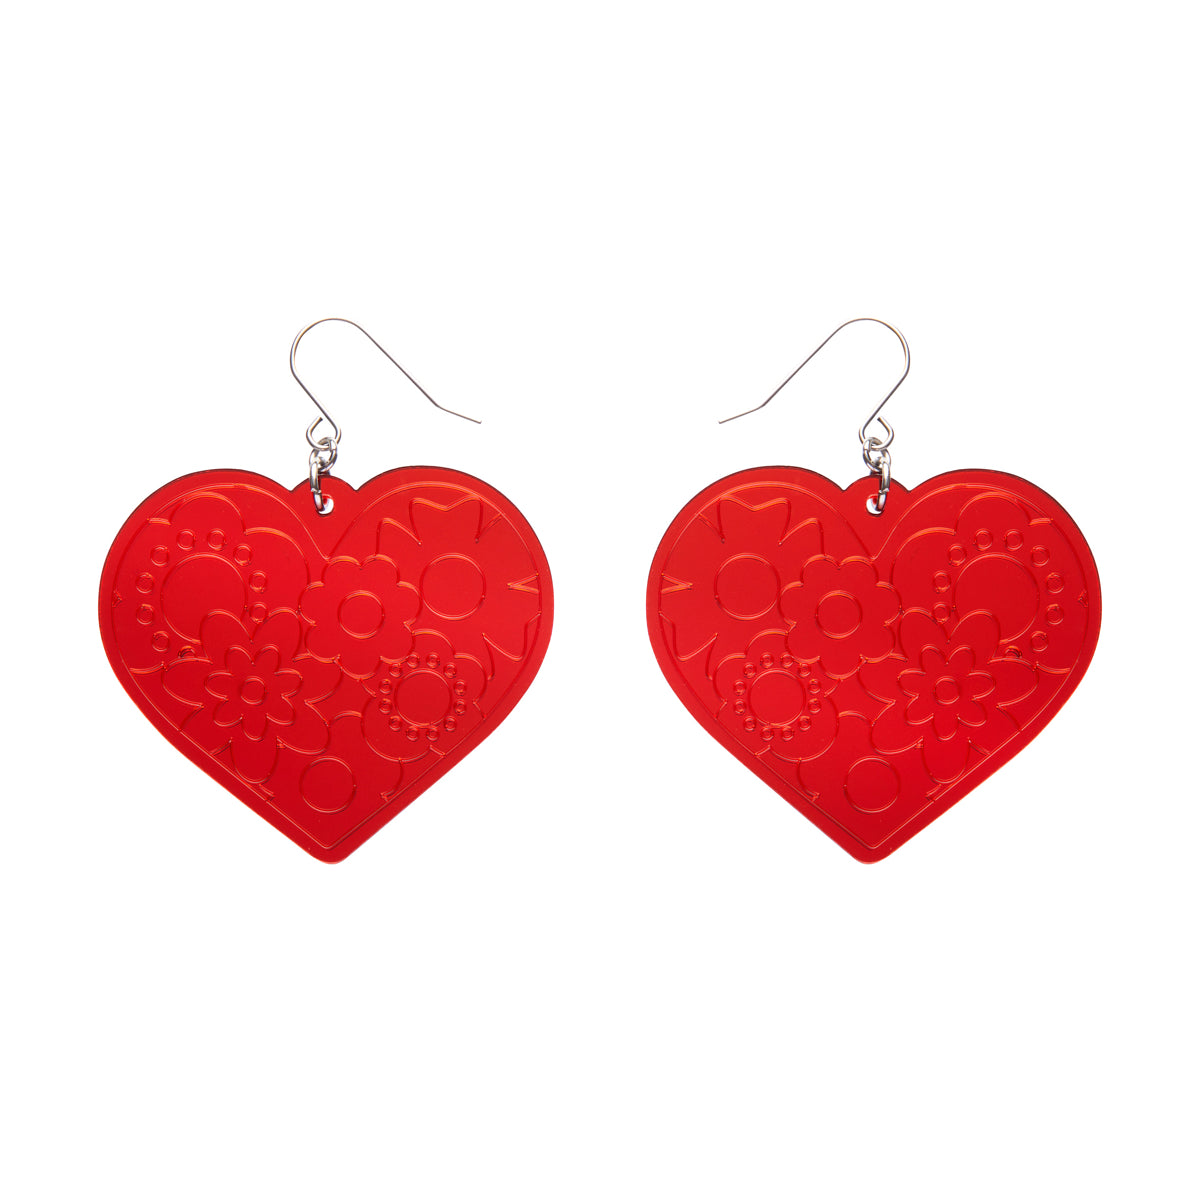 pair Spellbound Essentials Collection "Love Heart" dangle earrings in shiny etched mirror finish red 100% Acrylic resin